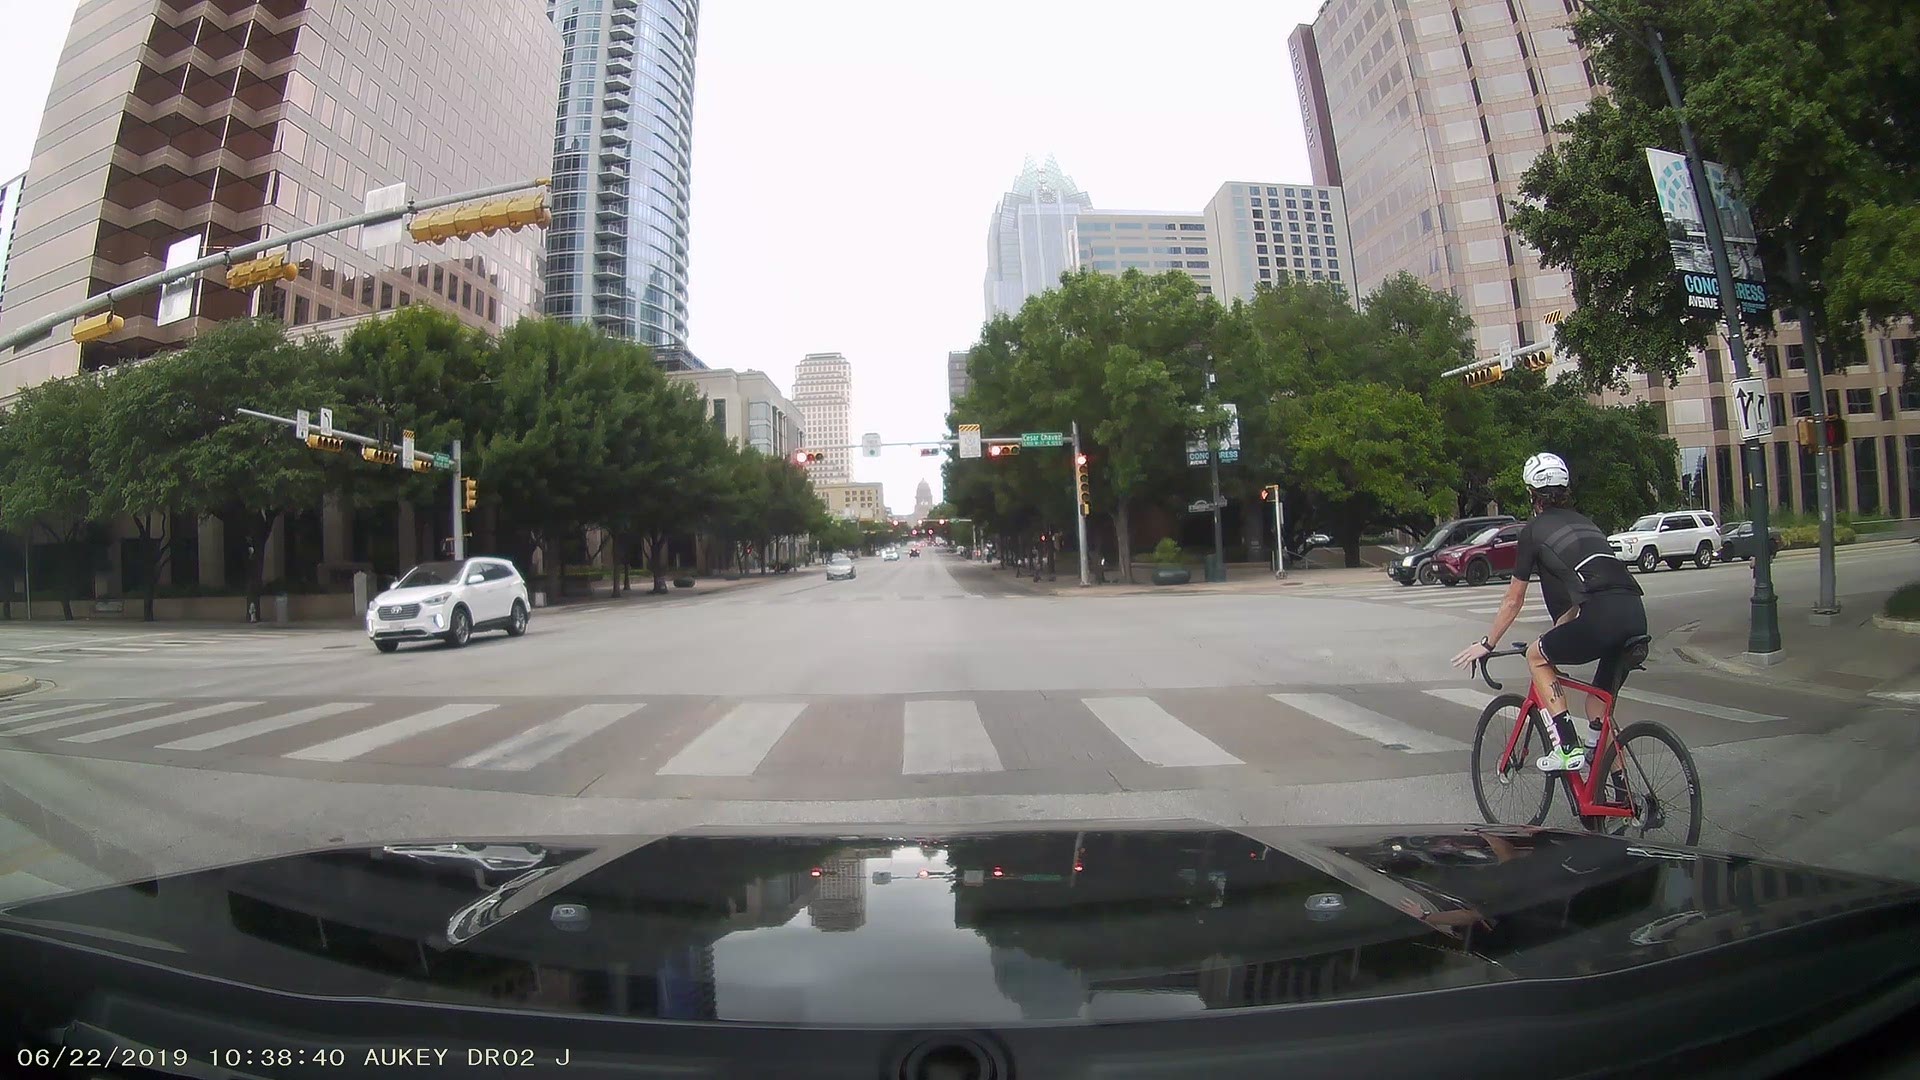 A cyclist can be seen running a red light in Austin while cutting across traffic, breaking multiple traffic laws.